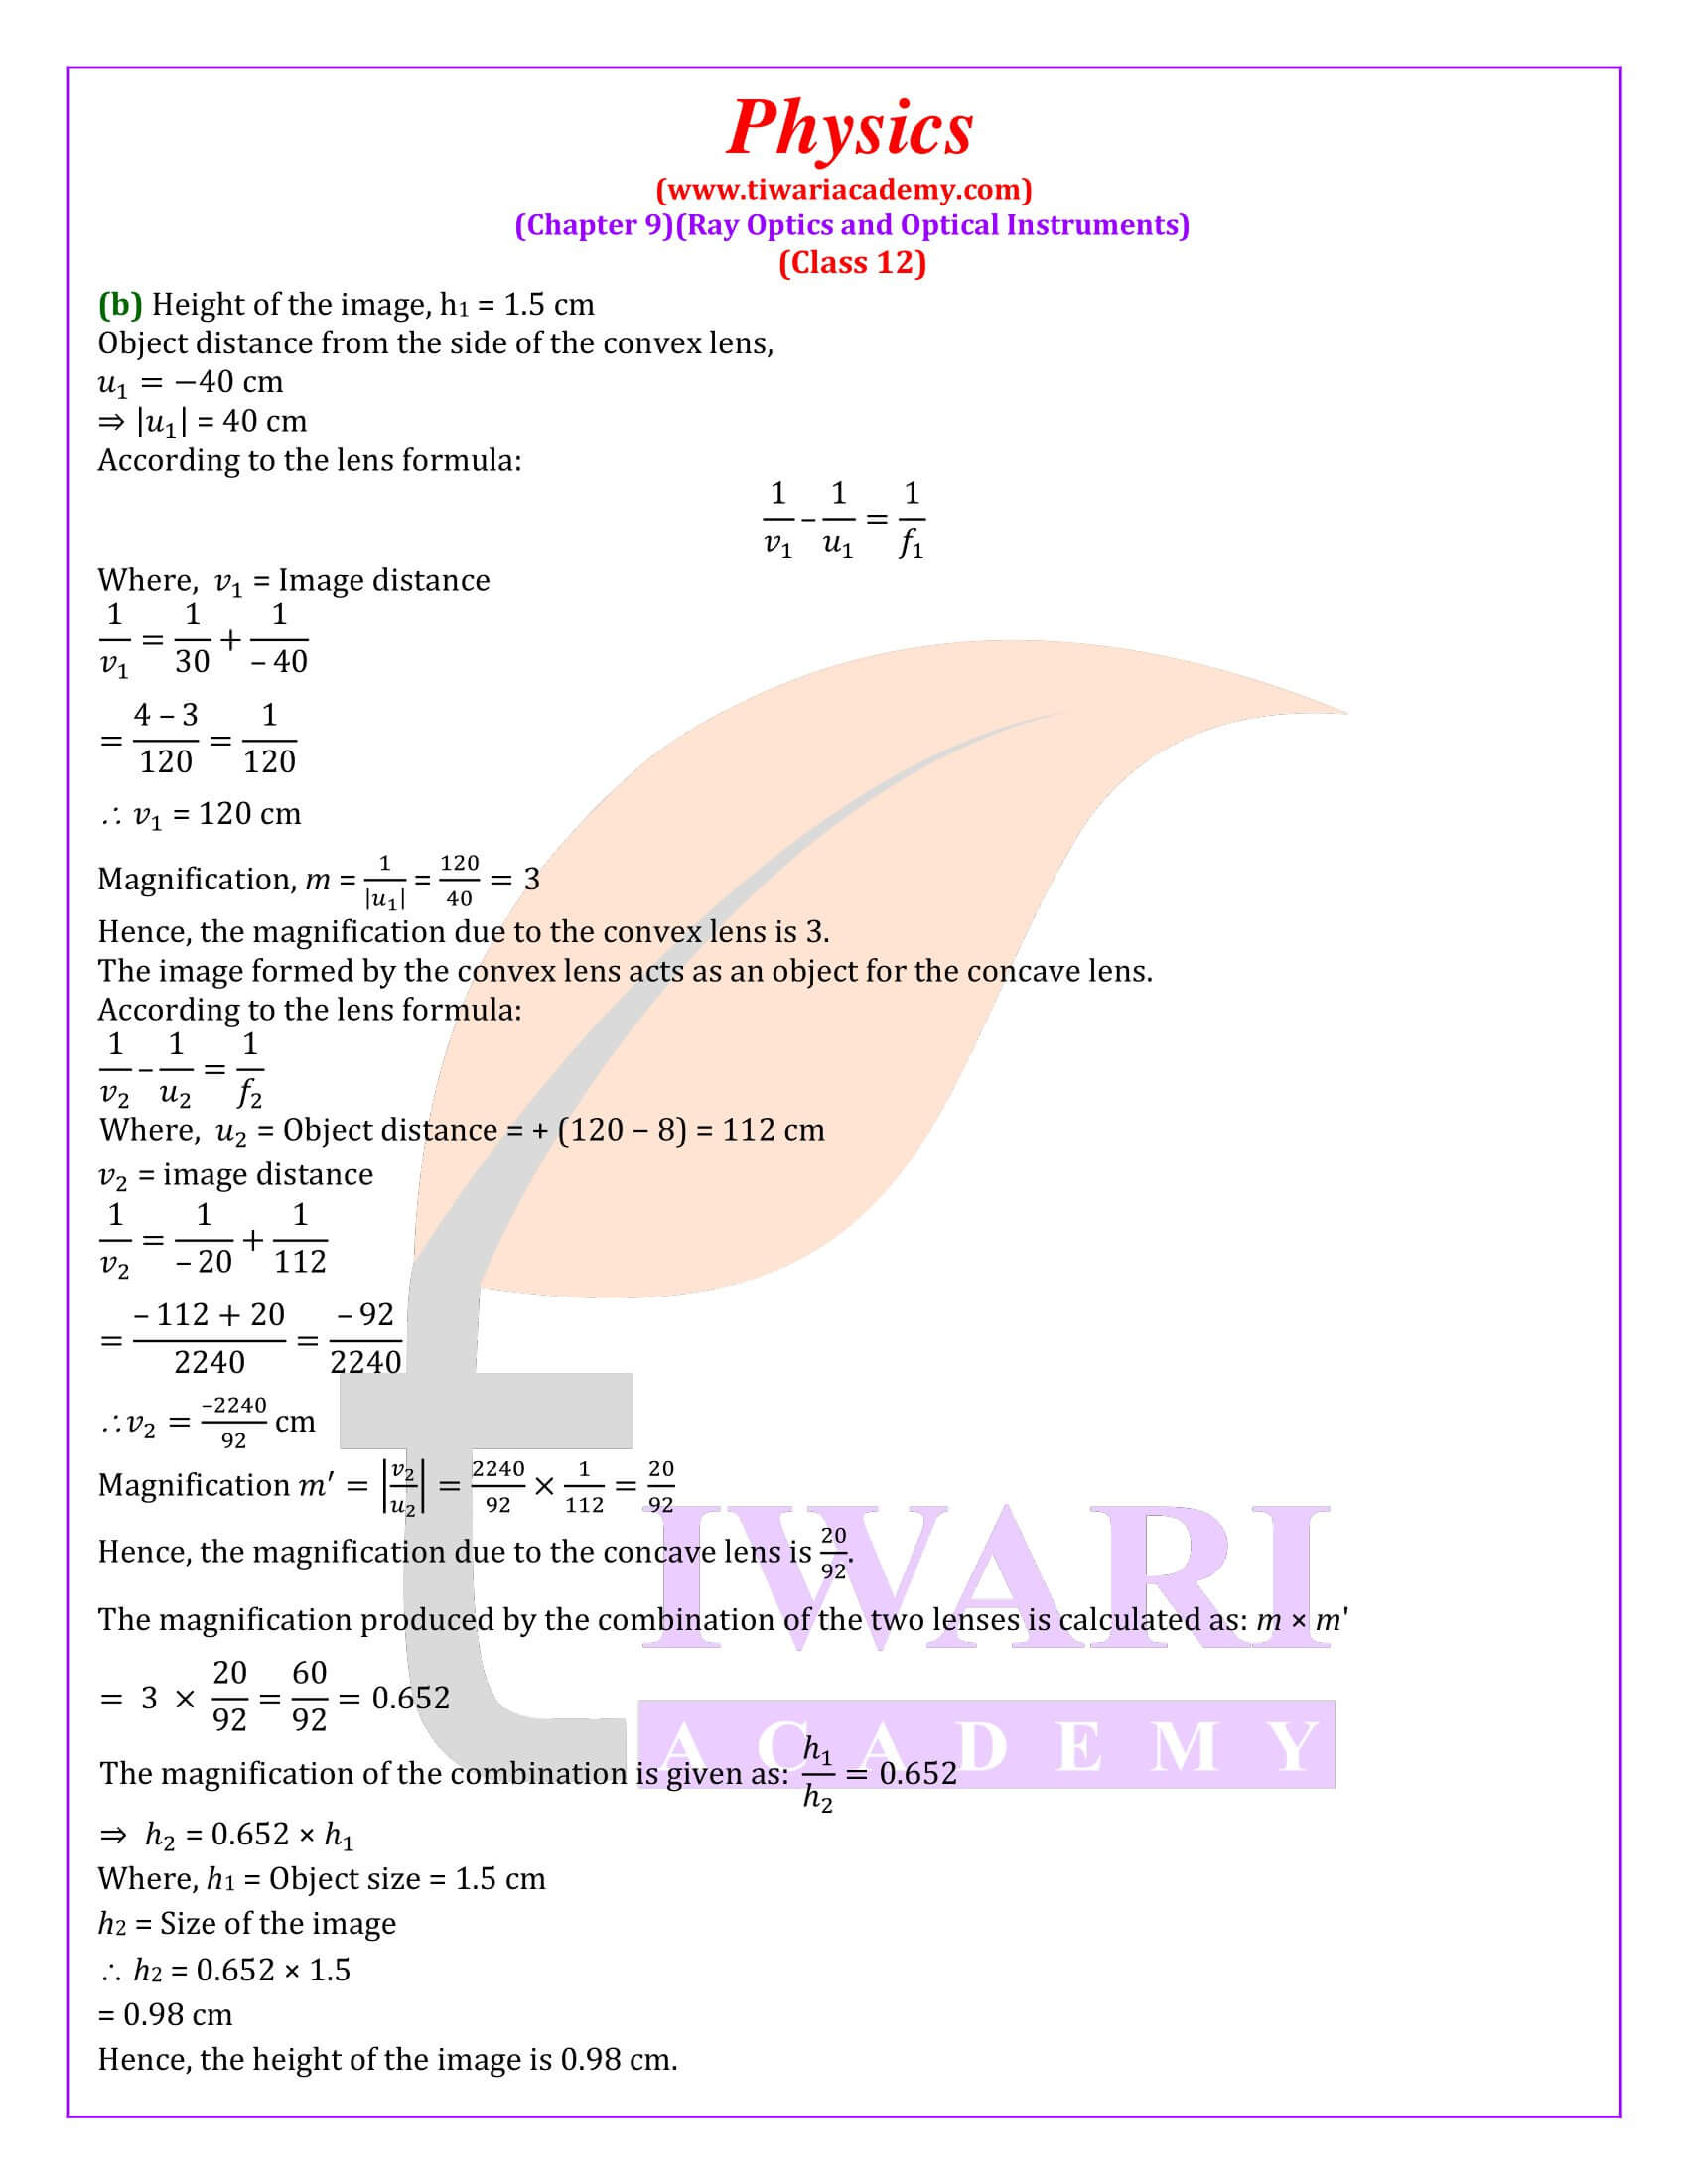 Class 12 Physics Chapter 9 exercises